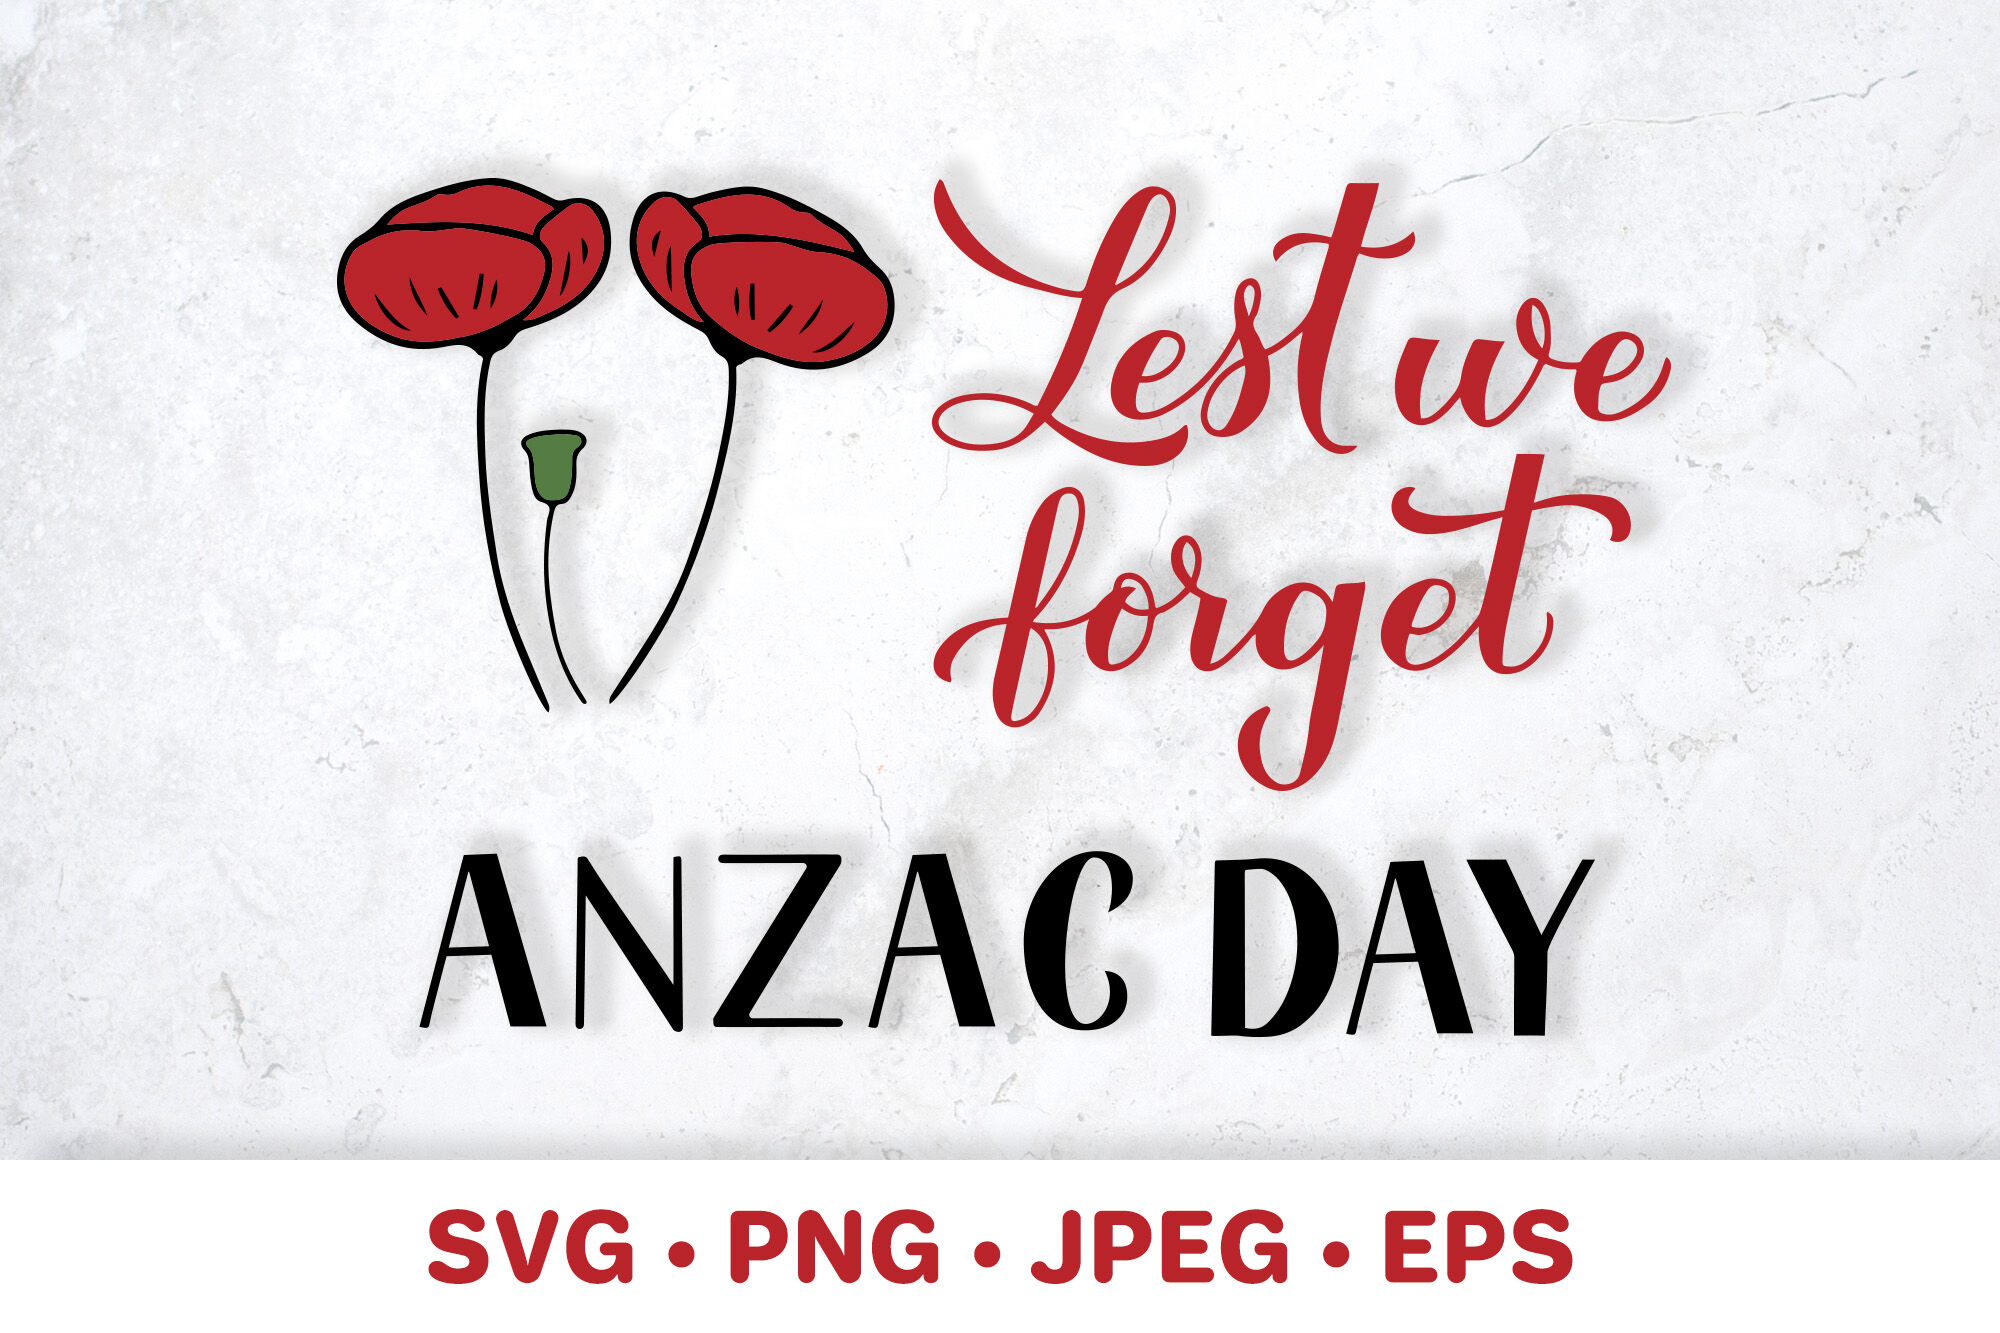 Lest We Forget Quote Badge PNG & SVG Design For T-Shirts